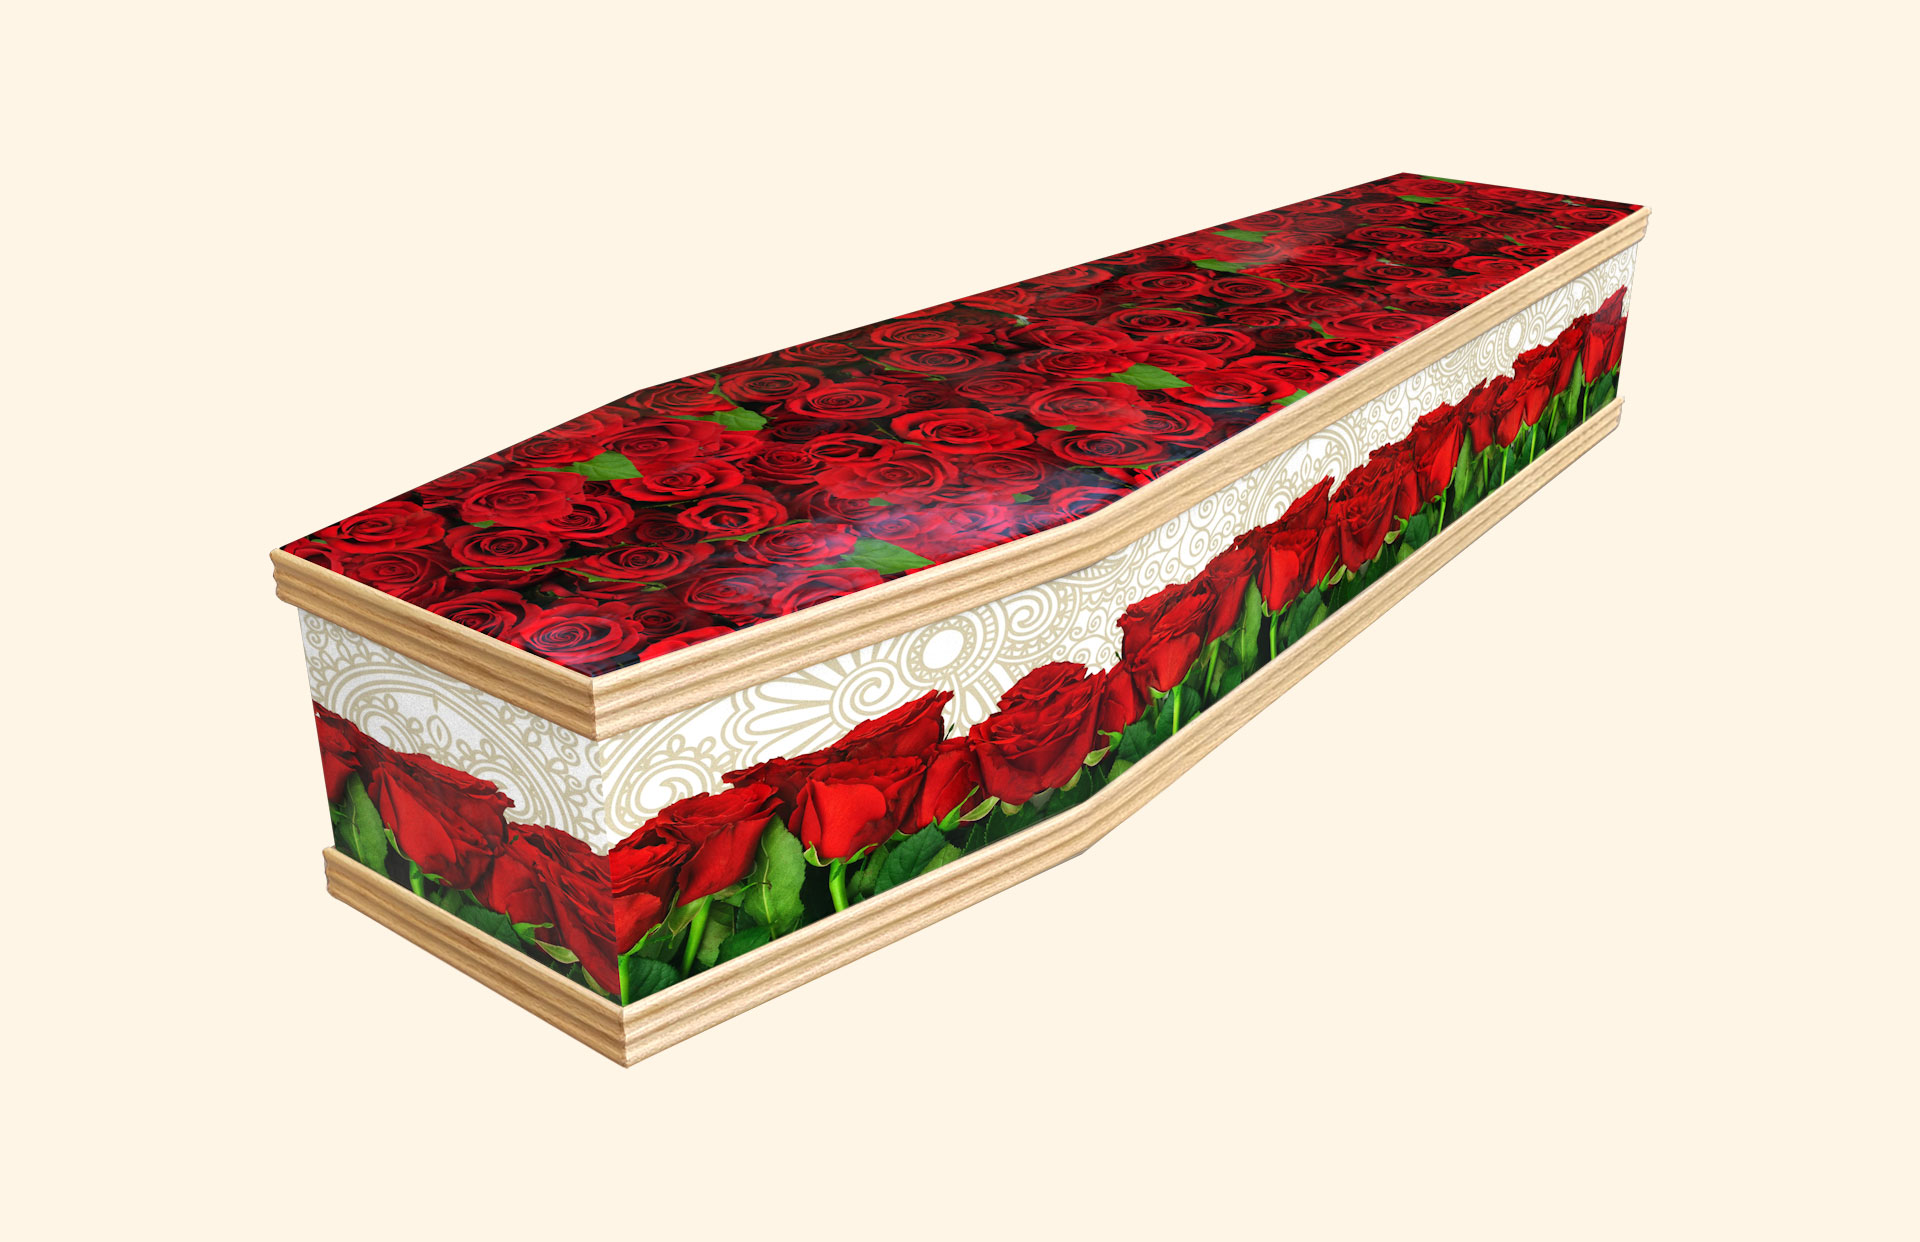 My Rosemary design on a classic coffin